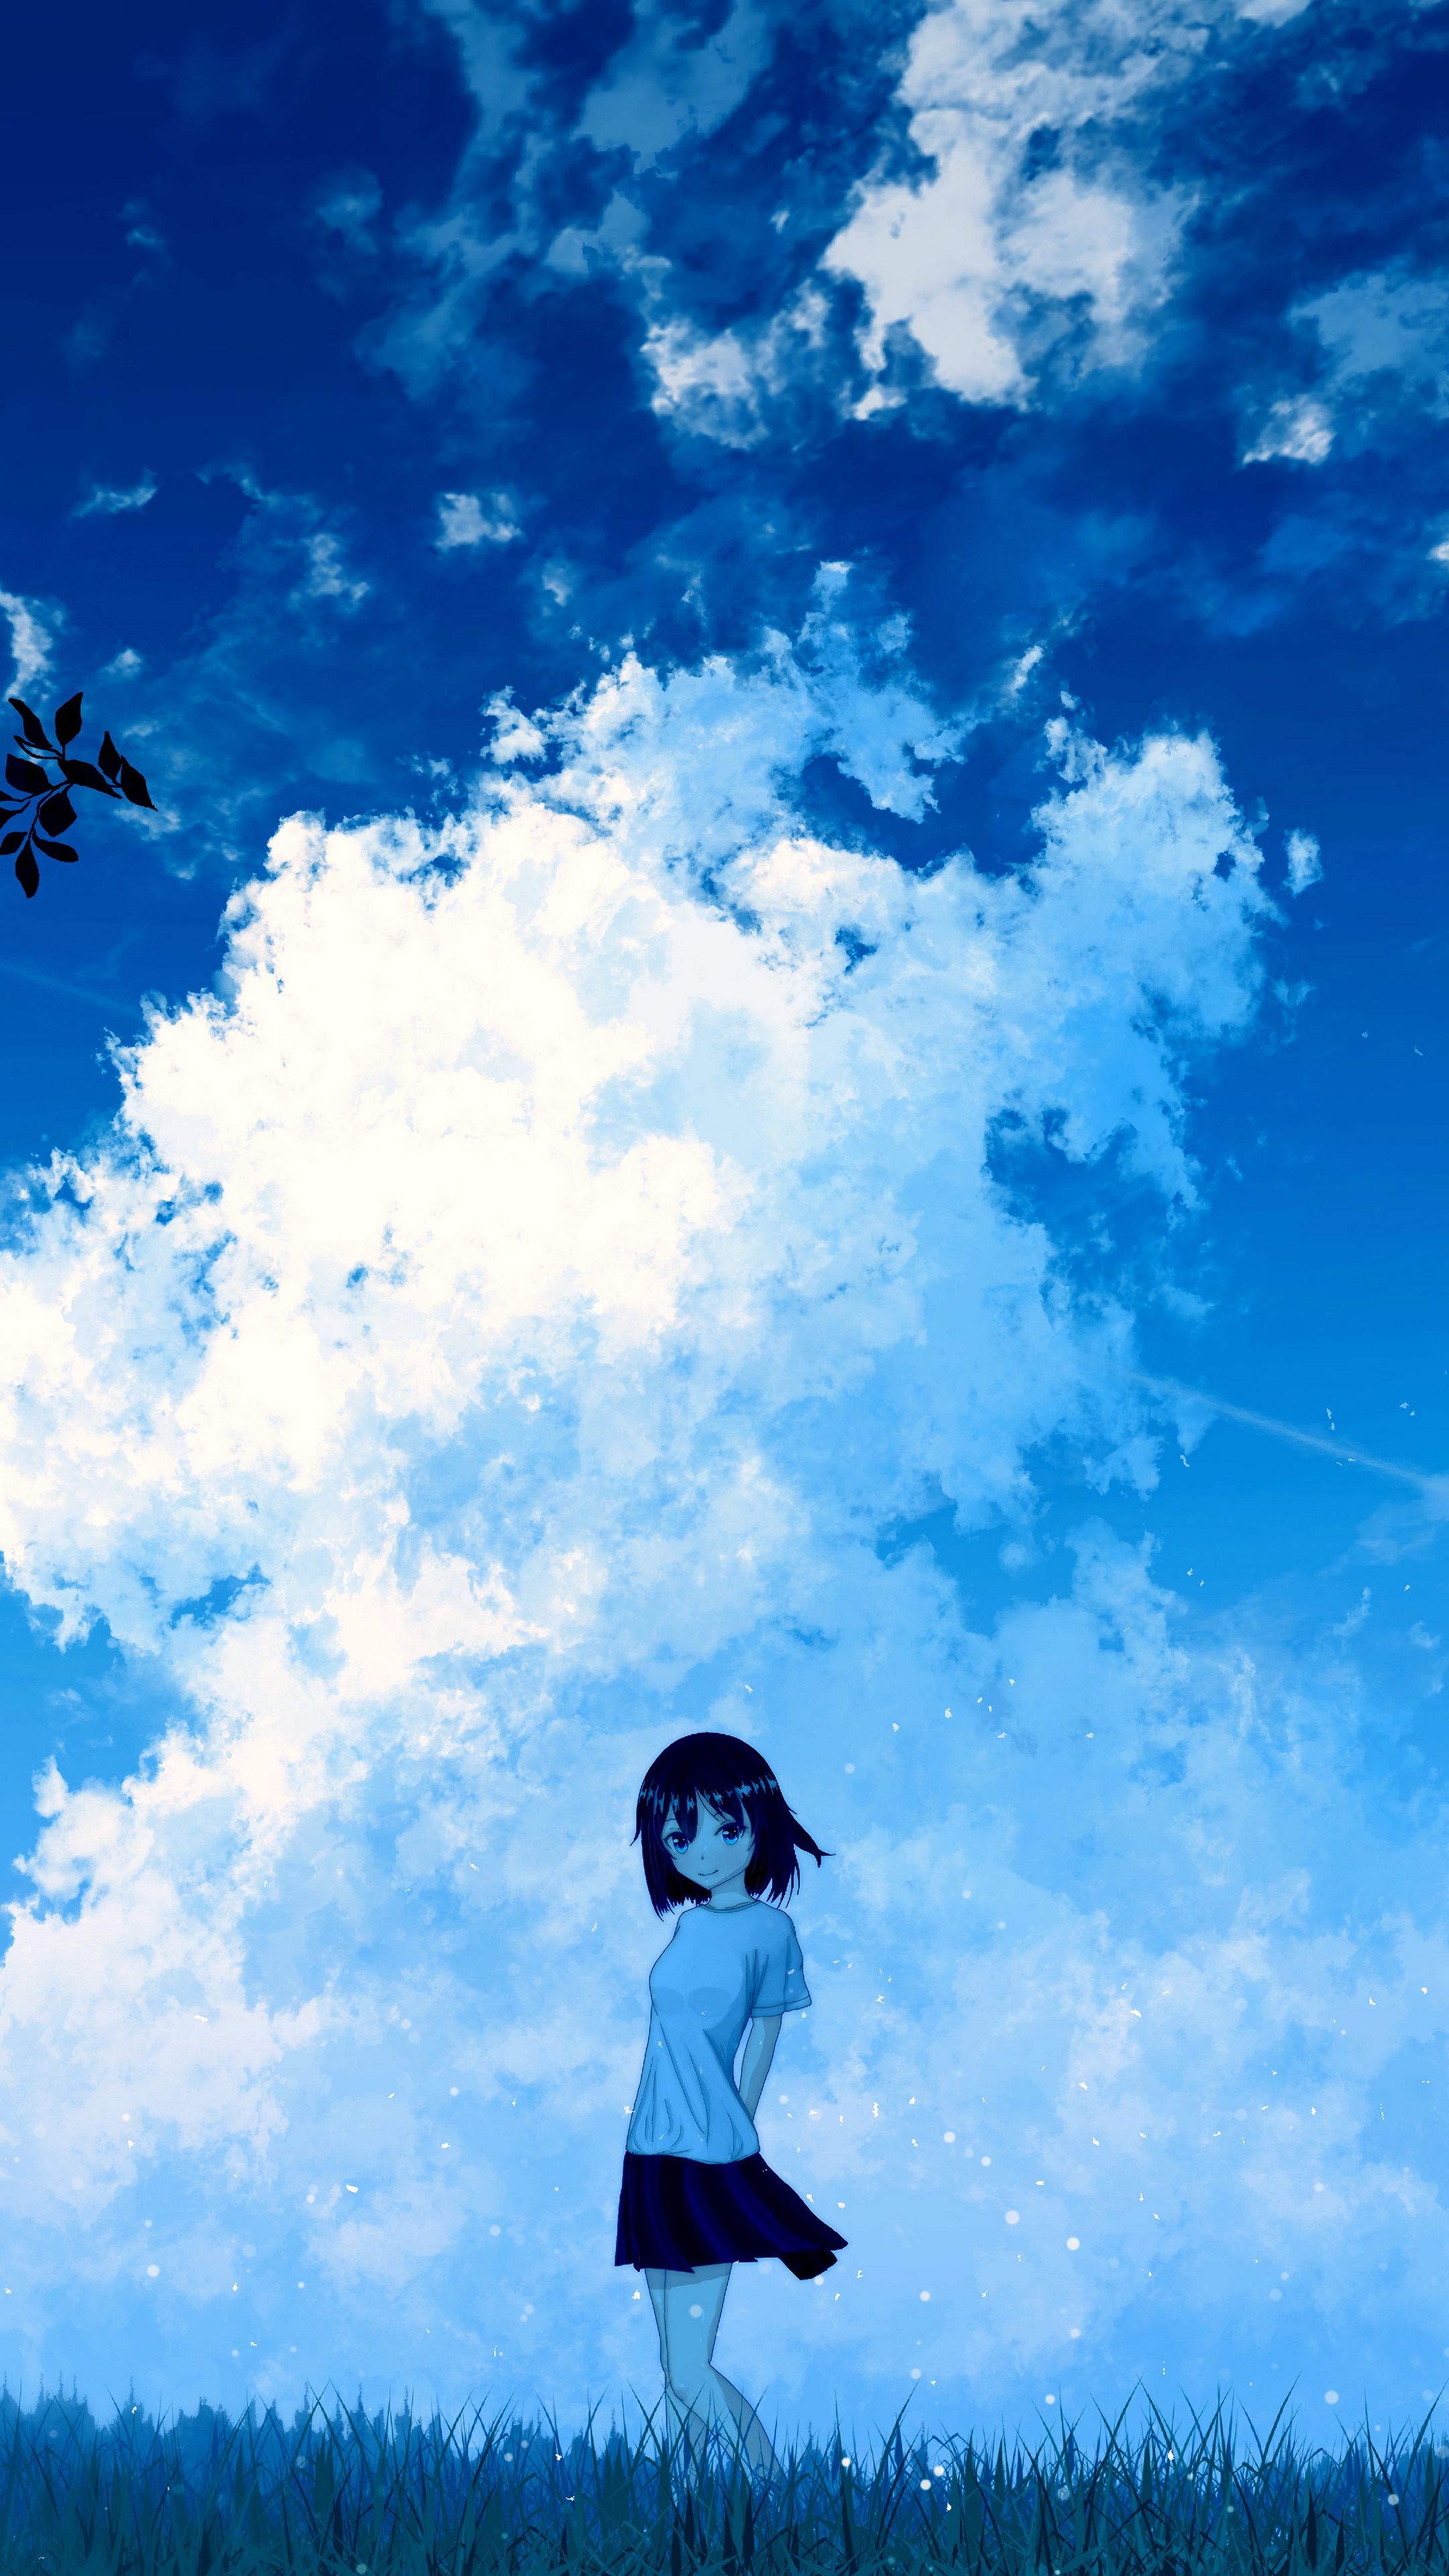 Anime Girl And Sky IPhone Wallpaper HD IPhone Wallpapers Wallpaper Download   MOONAZ